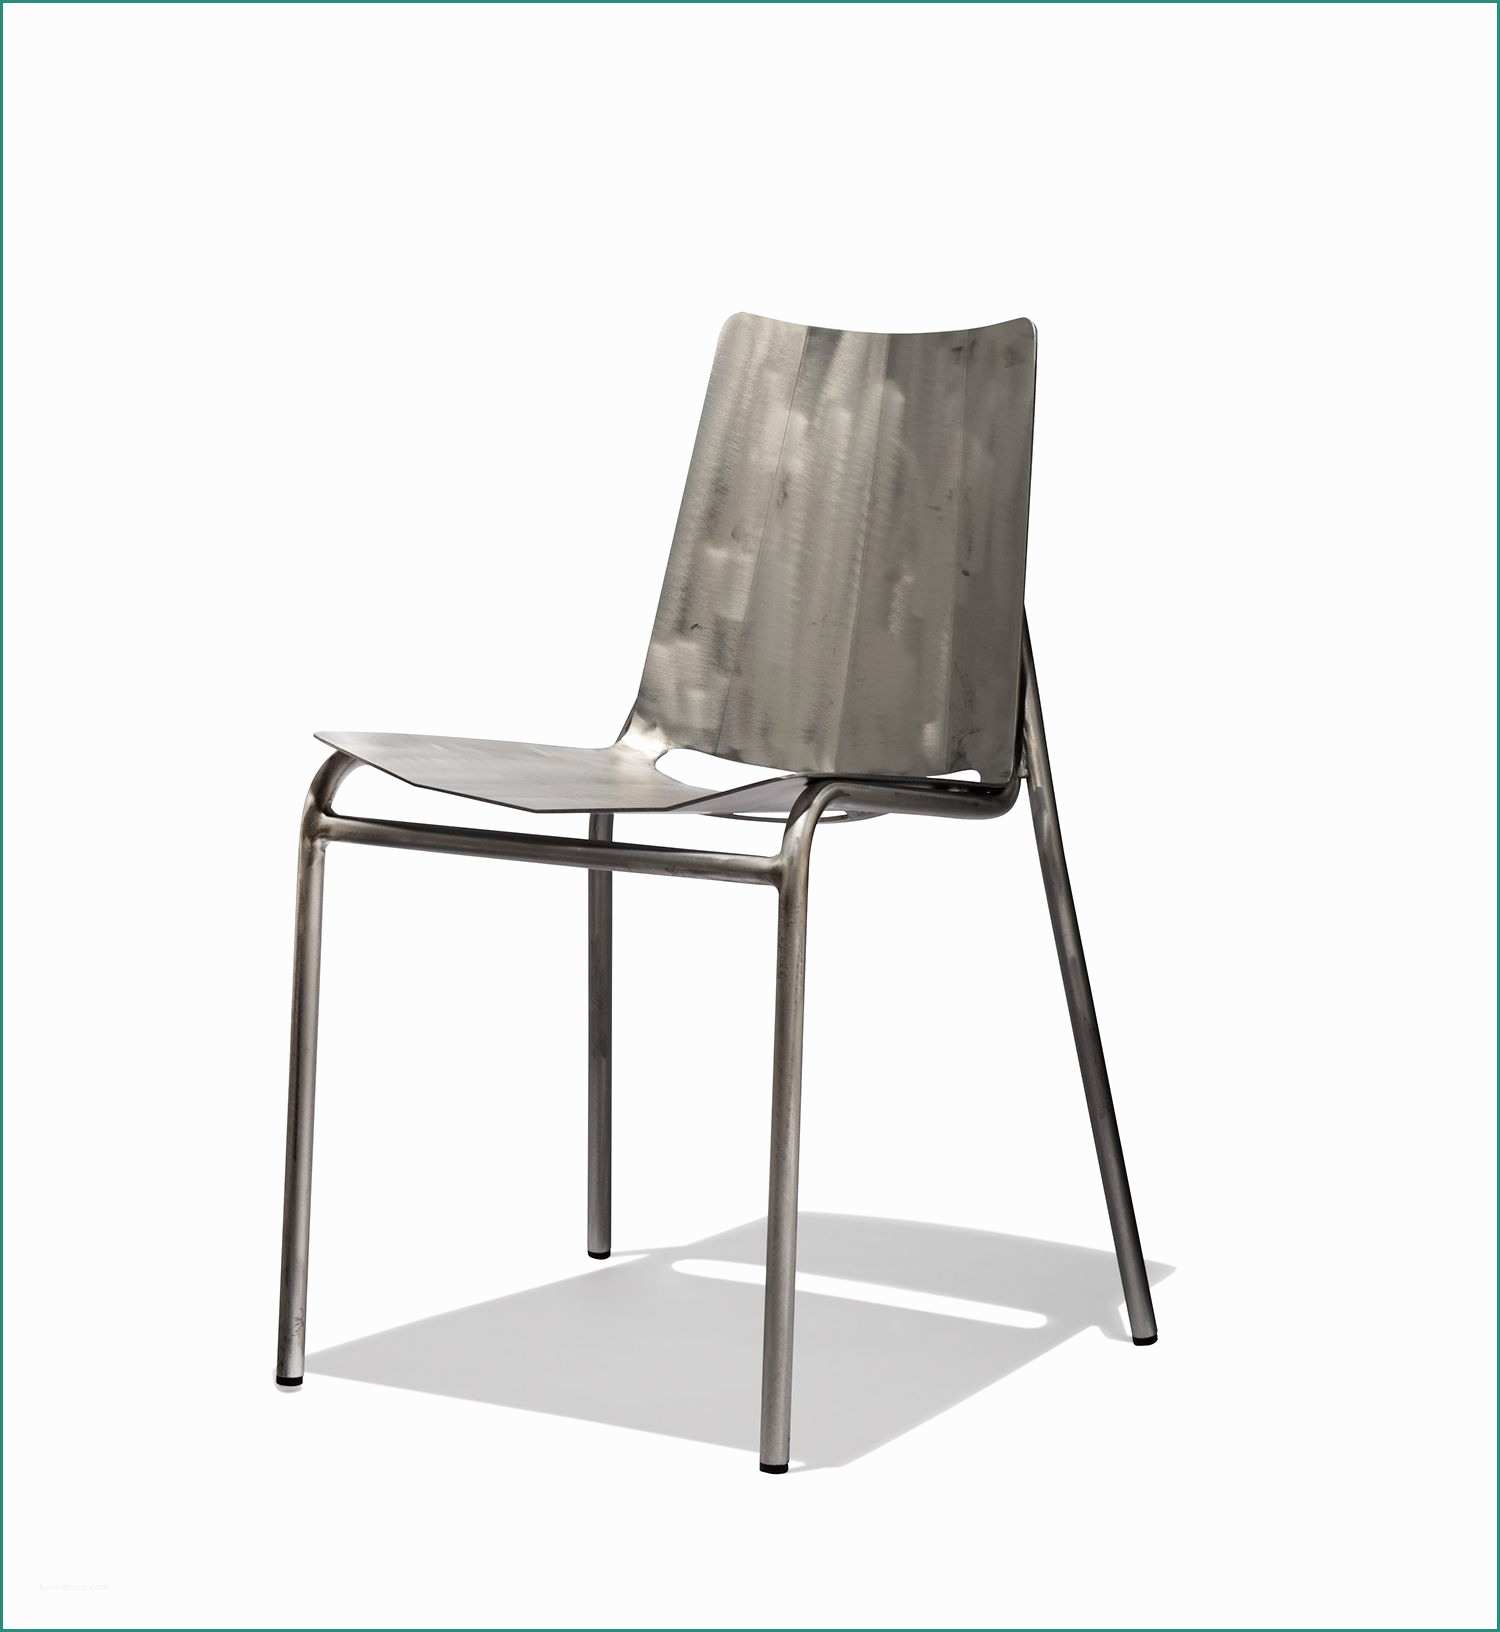 Sedie Per Esterno E Slant Side Chair From Industry West Chairs